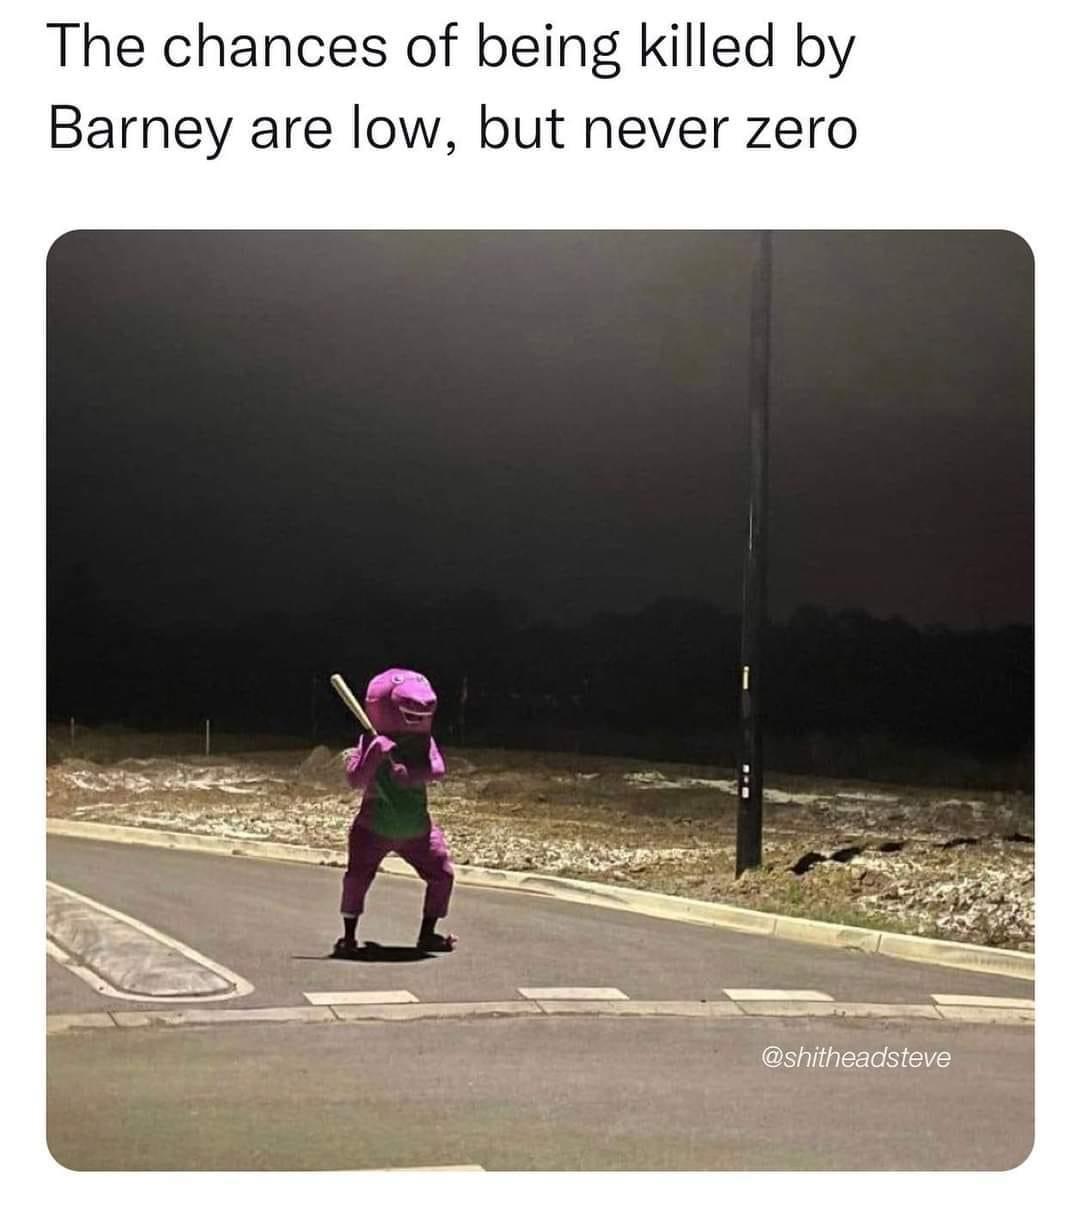 monday morning randomness - chances of being killed by barney are low but never zero - The chances of being killed by Barney are low, but never zero